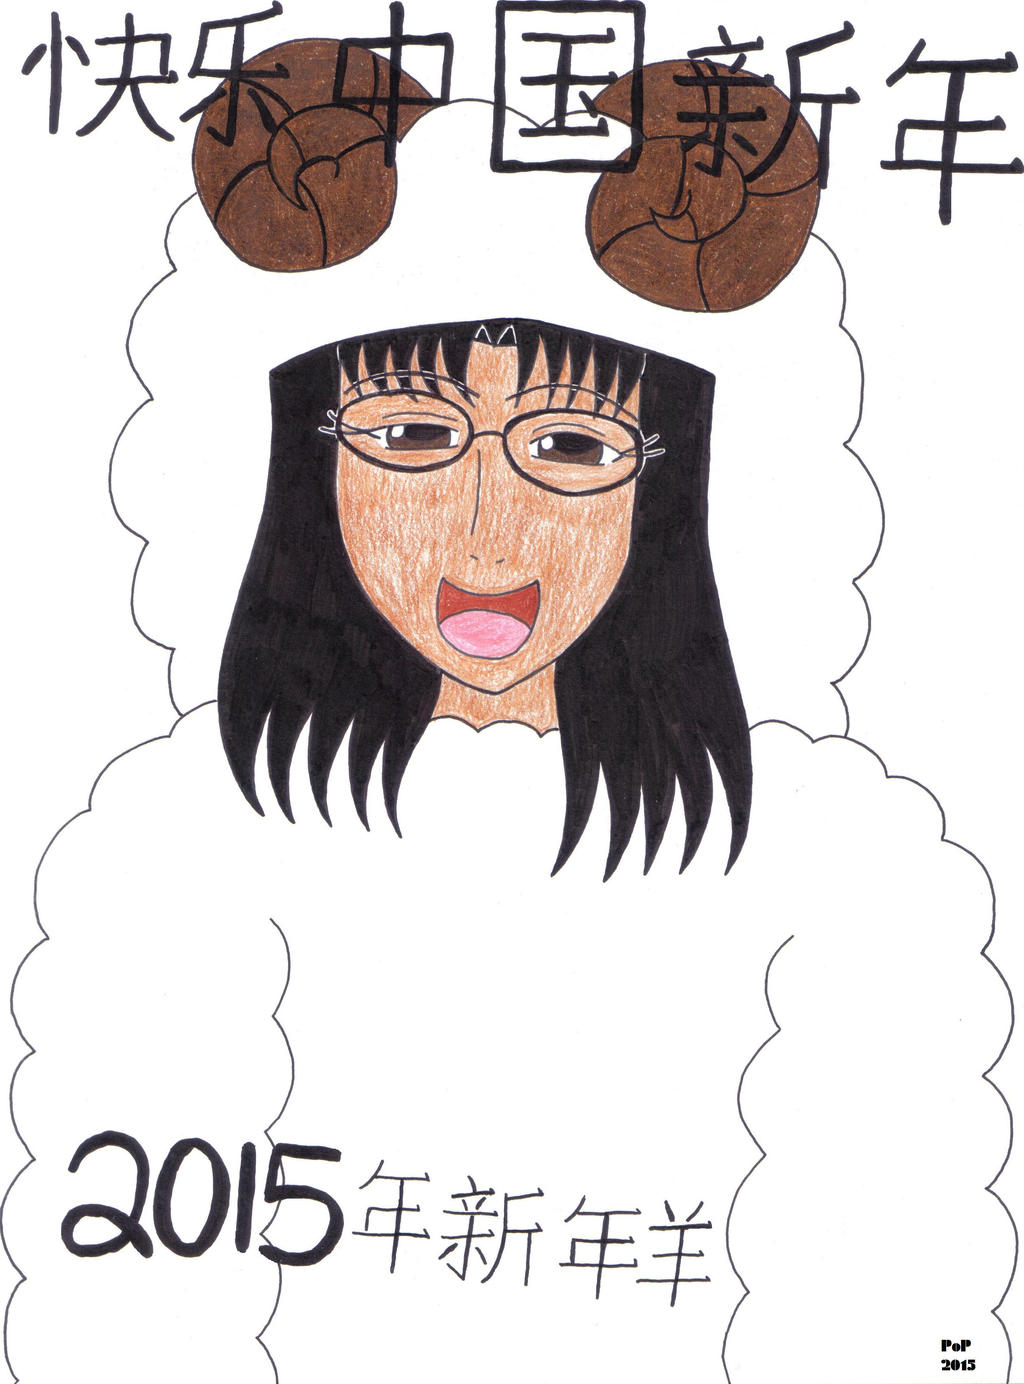 happy_chinese_new_year__2015_sheep_by_prince_of_pop-d8inmdz.jpg